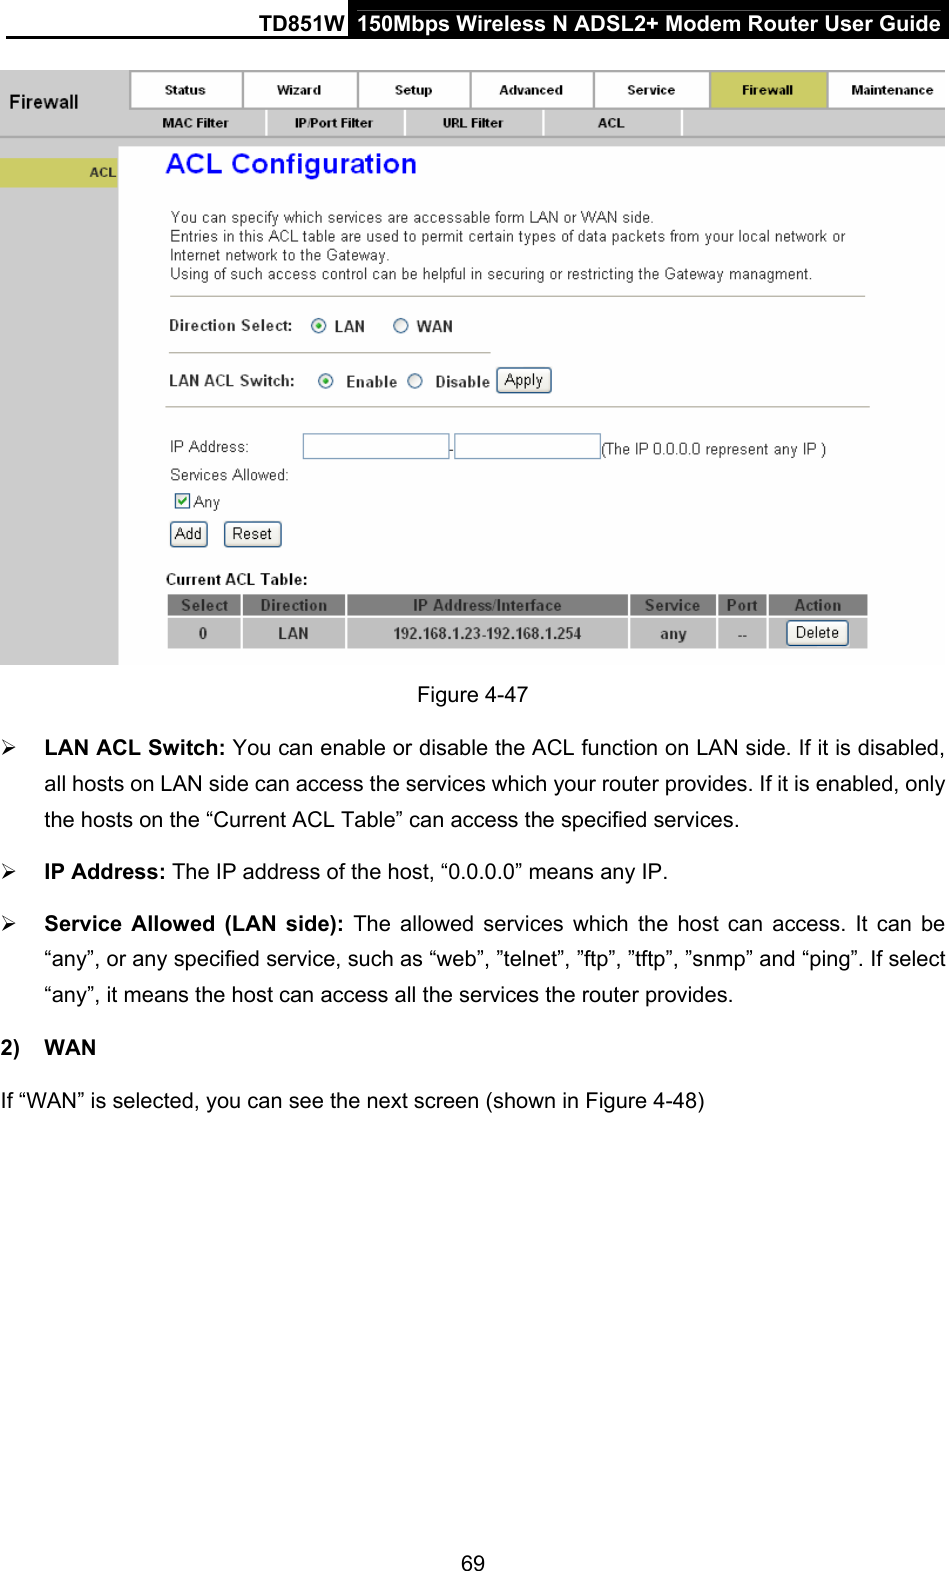 TD851W  150Mbps Wireless N ADSL2+ Modem Router User Guide  Figure 4-47 ¾ LAN ACL Switch: You can enable or disable the ACL function on LAN side. If it is disabled, all hosts on LAN side can access the services which your router provides. If it is enabled, only the hosts on the “Current ACL Table” can access the specified services. ¾ IP Address: The IP address of the host, “0.0.0.0” means any IP. ¾ Service Allowed (LAN side): The allowed services which the host can access. It can be “any”, or any specified service, such as “web”, ”telnet”, ”ftp”, ”tftp”, ”snmp” and “ping”. If select “any”, it means the host can access all the services the router provides. 2) WAN If “WAN” is selected, you can see the next screen (shown in Figure 4-48)  69 